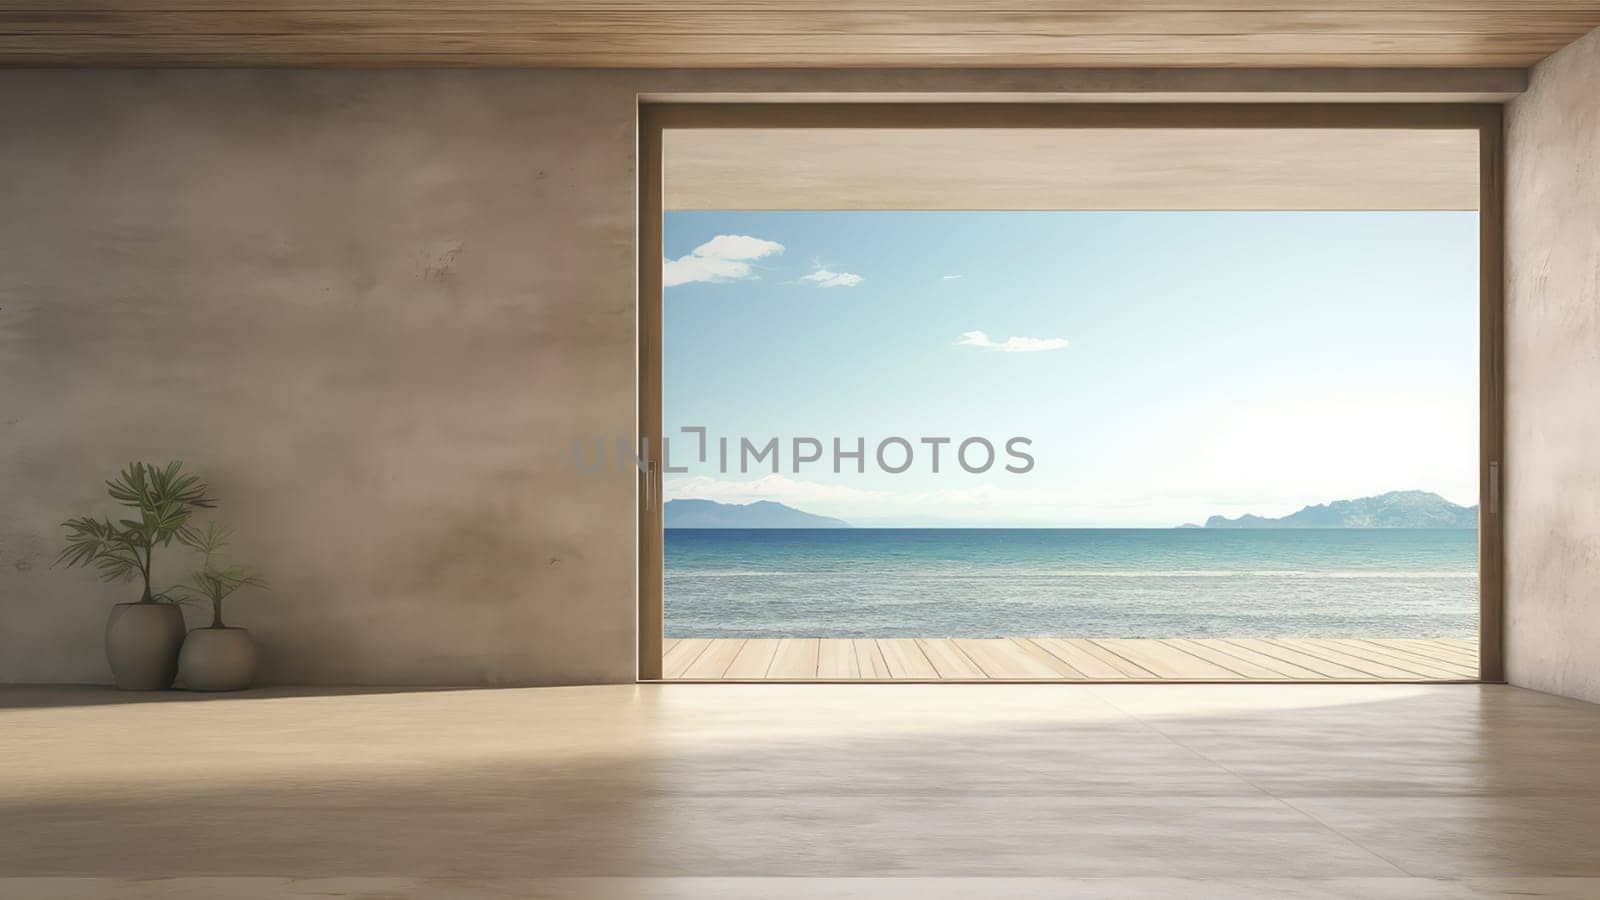 3D rendering interior of a living room with sea view background. The seascape shining in the day light, creating a beautiful and exotic scenery.